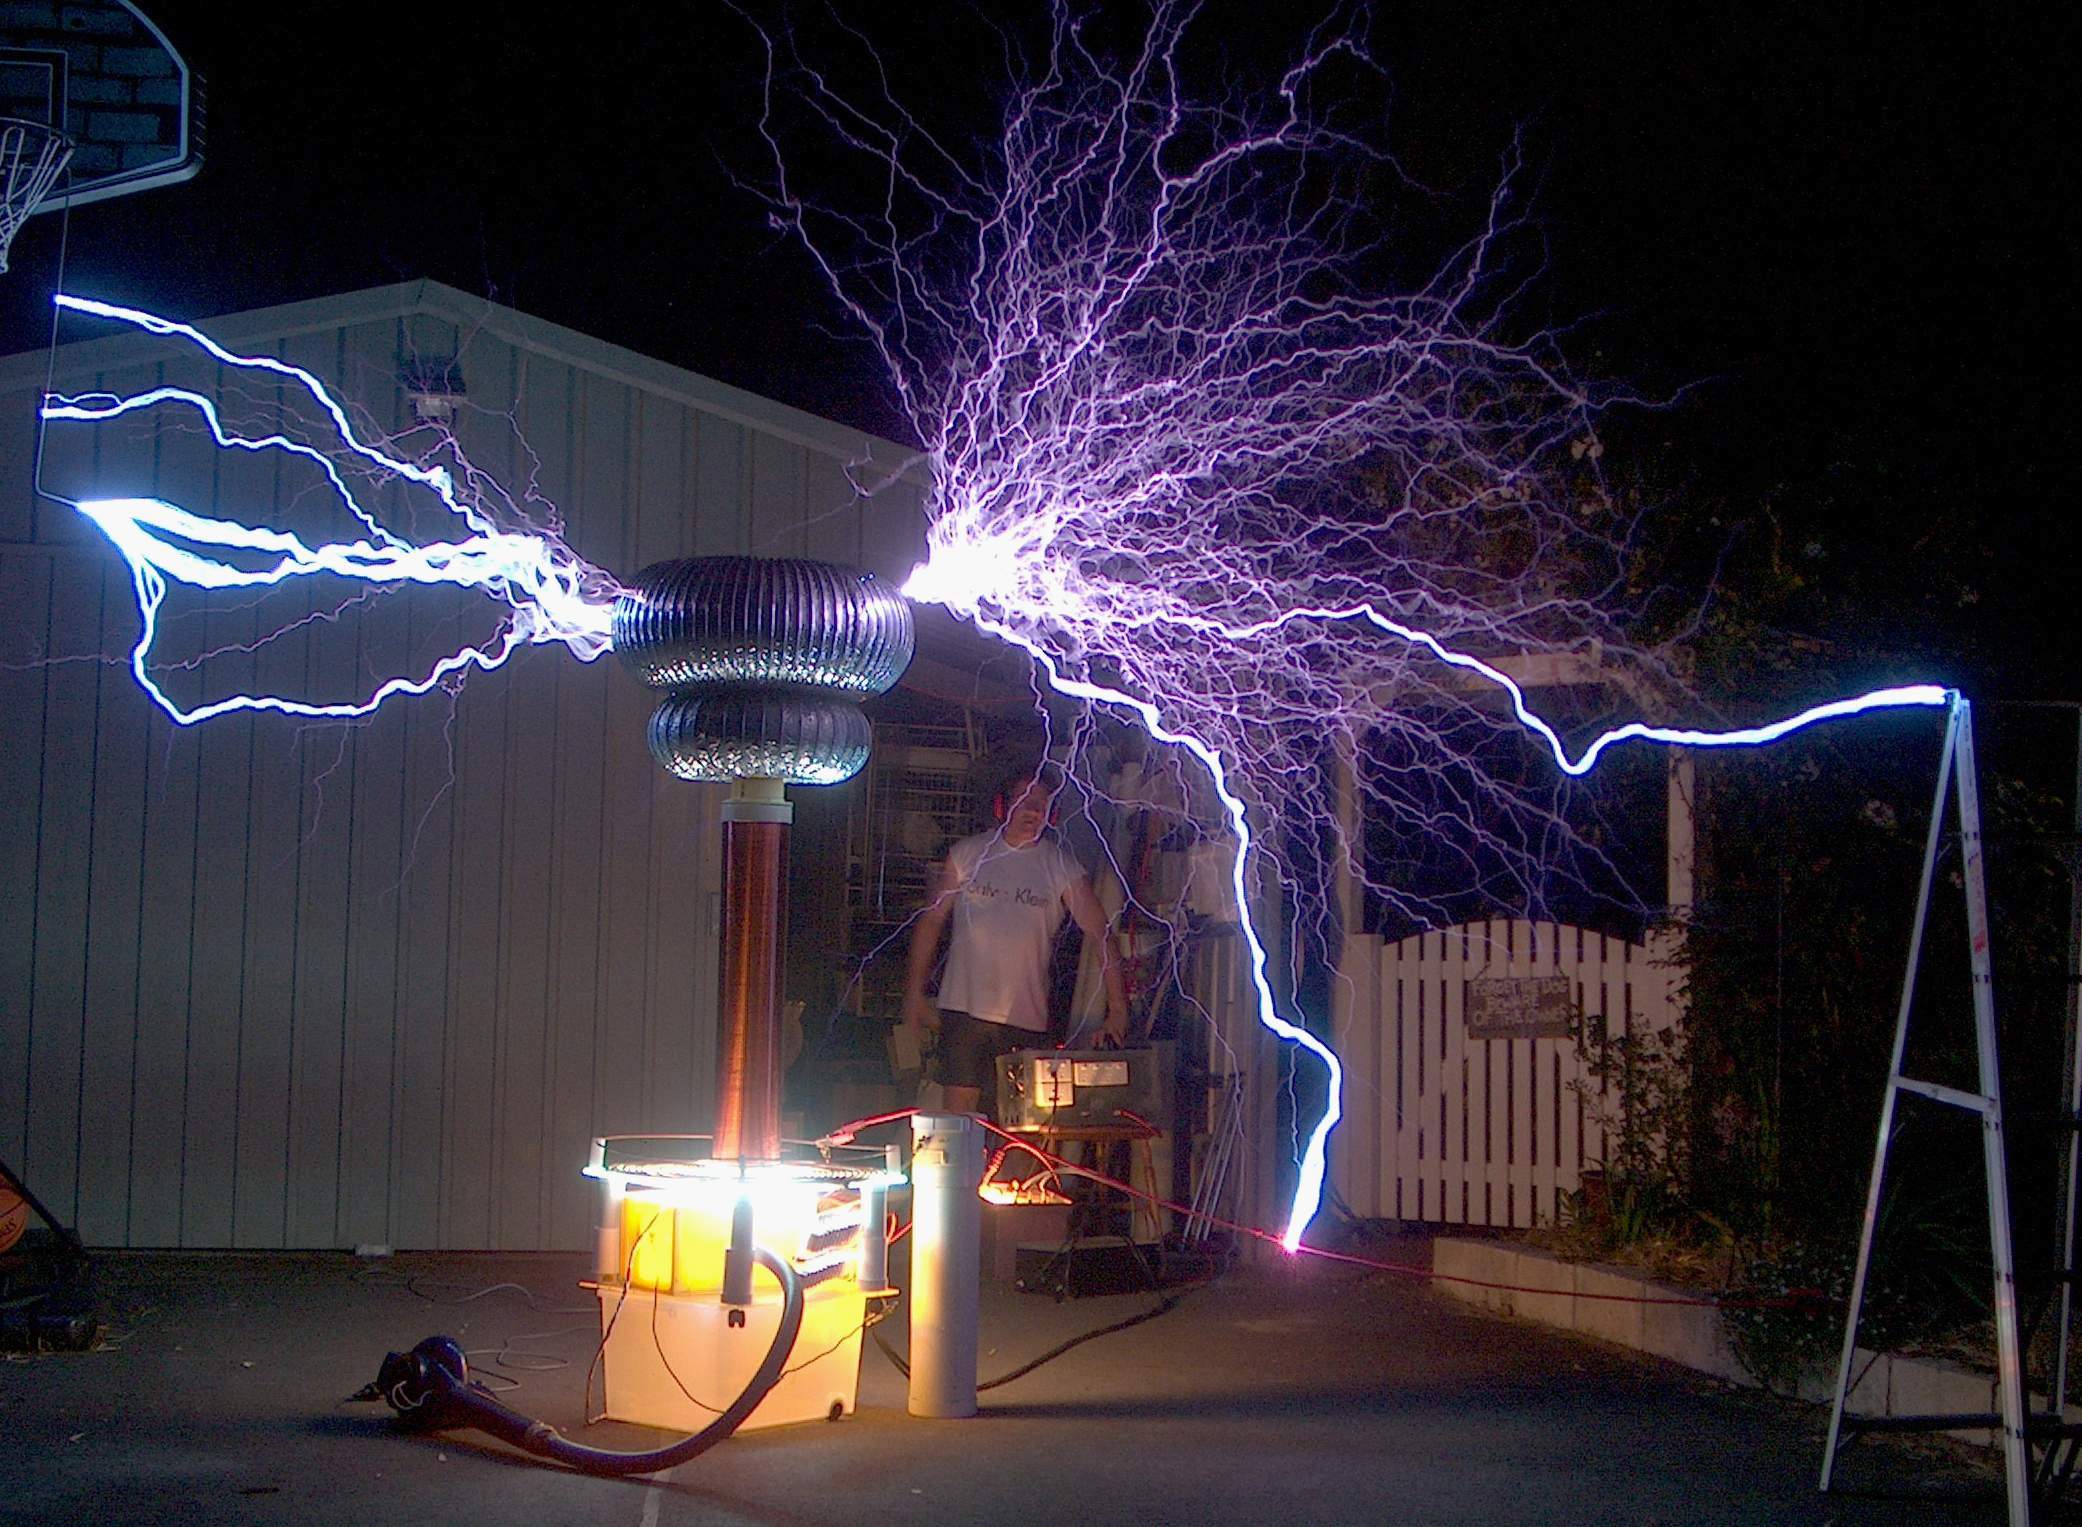 Tesla coil pictures